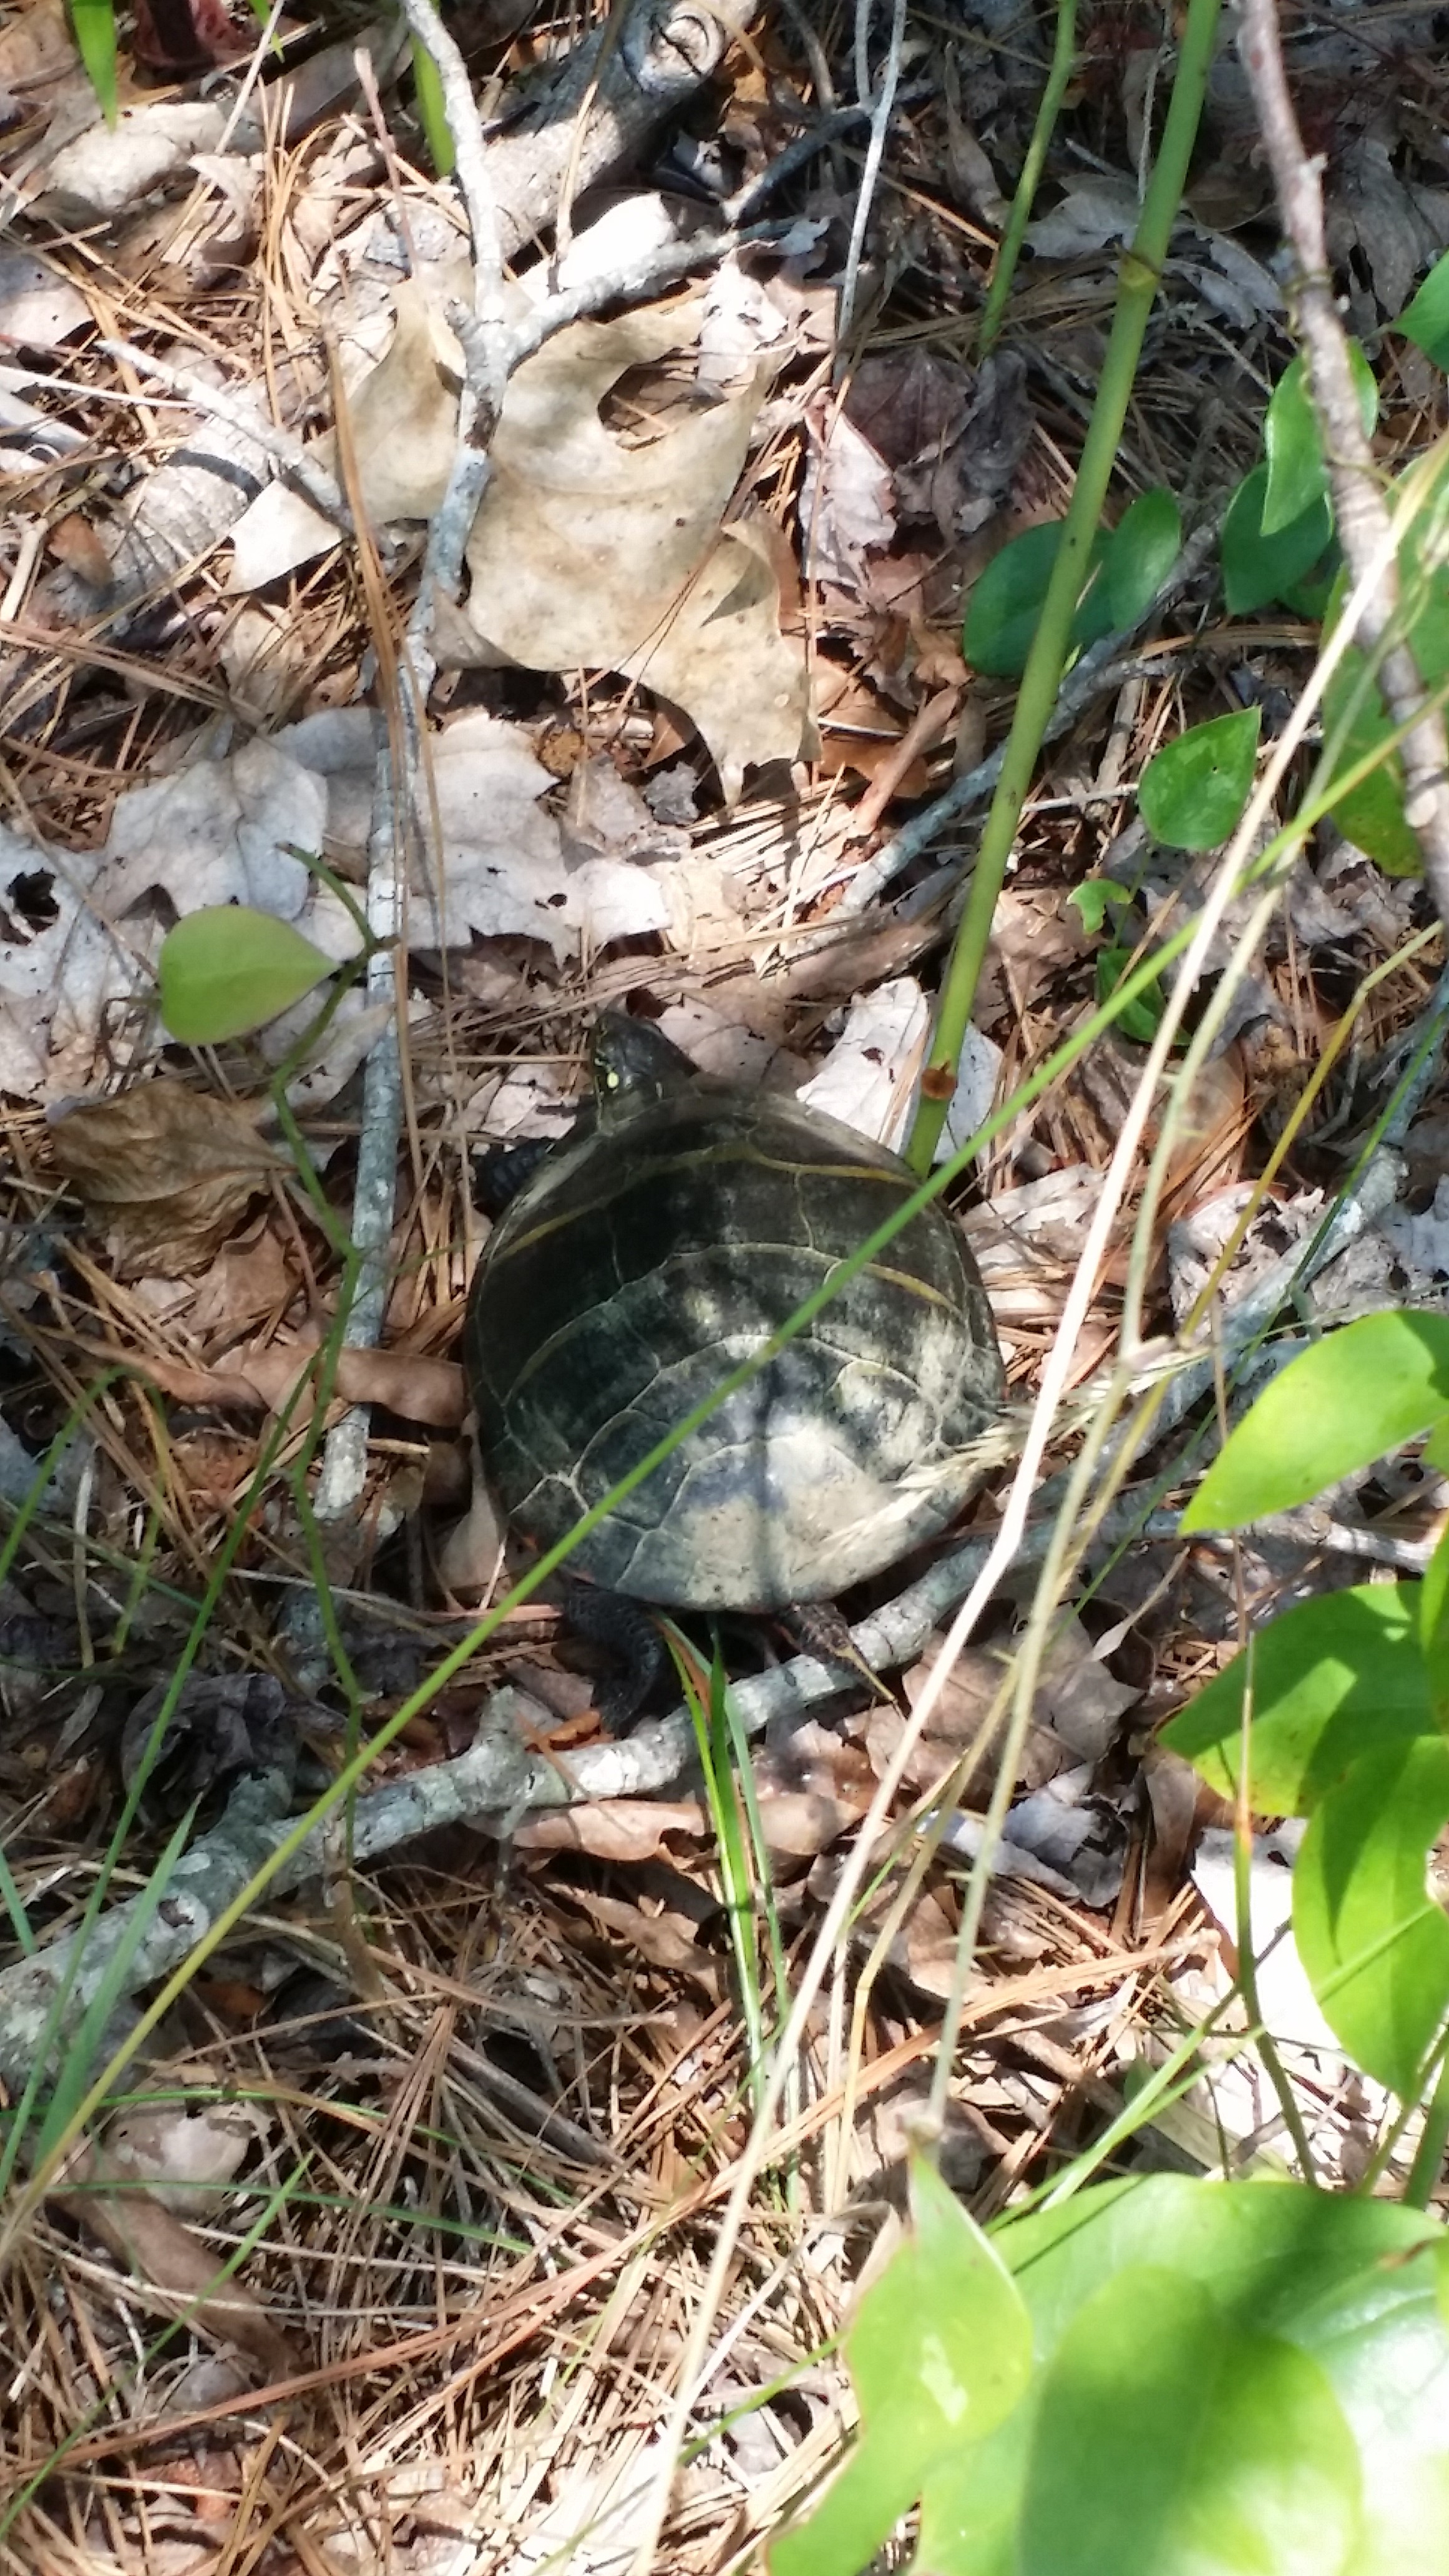 Another Turtle Rescued!